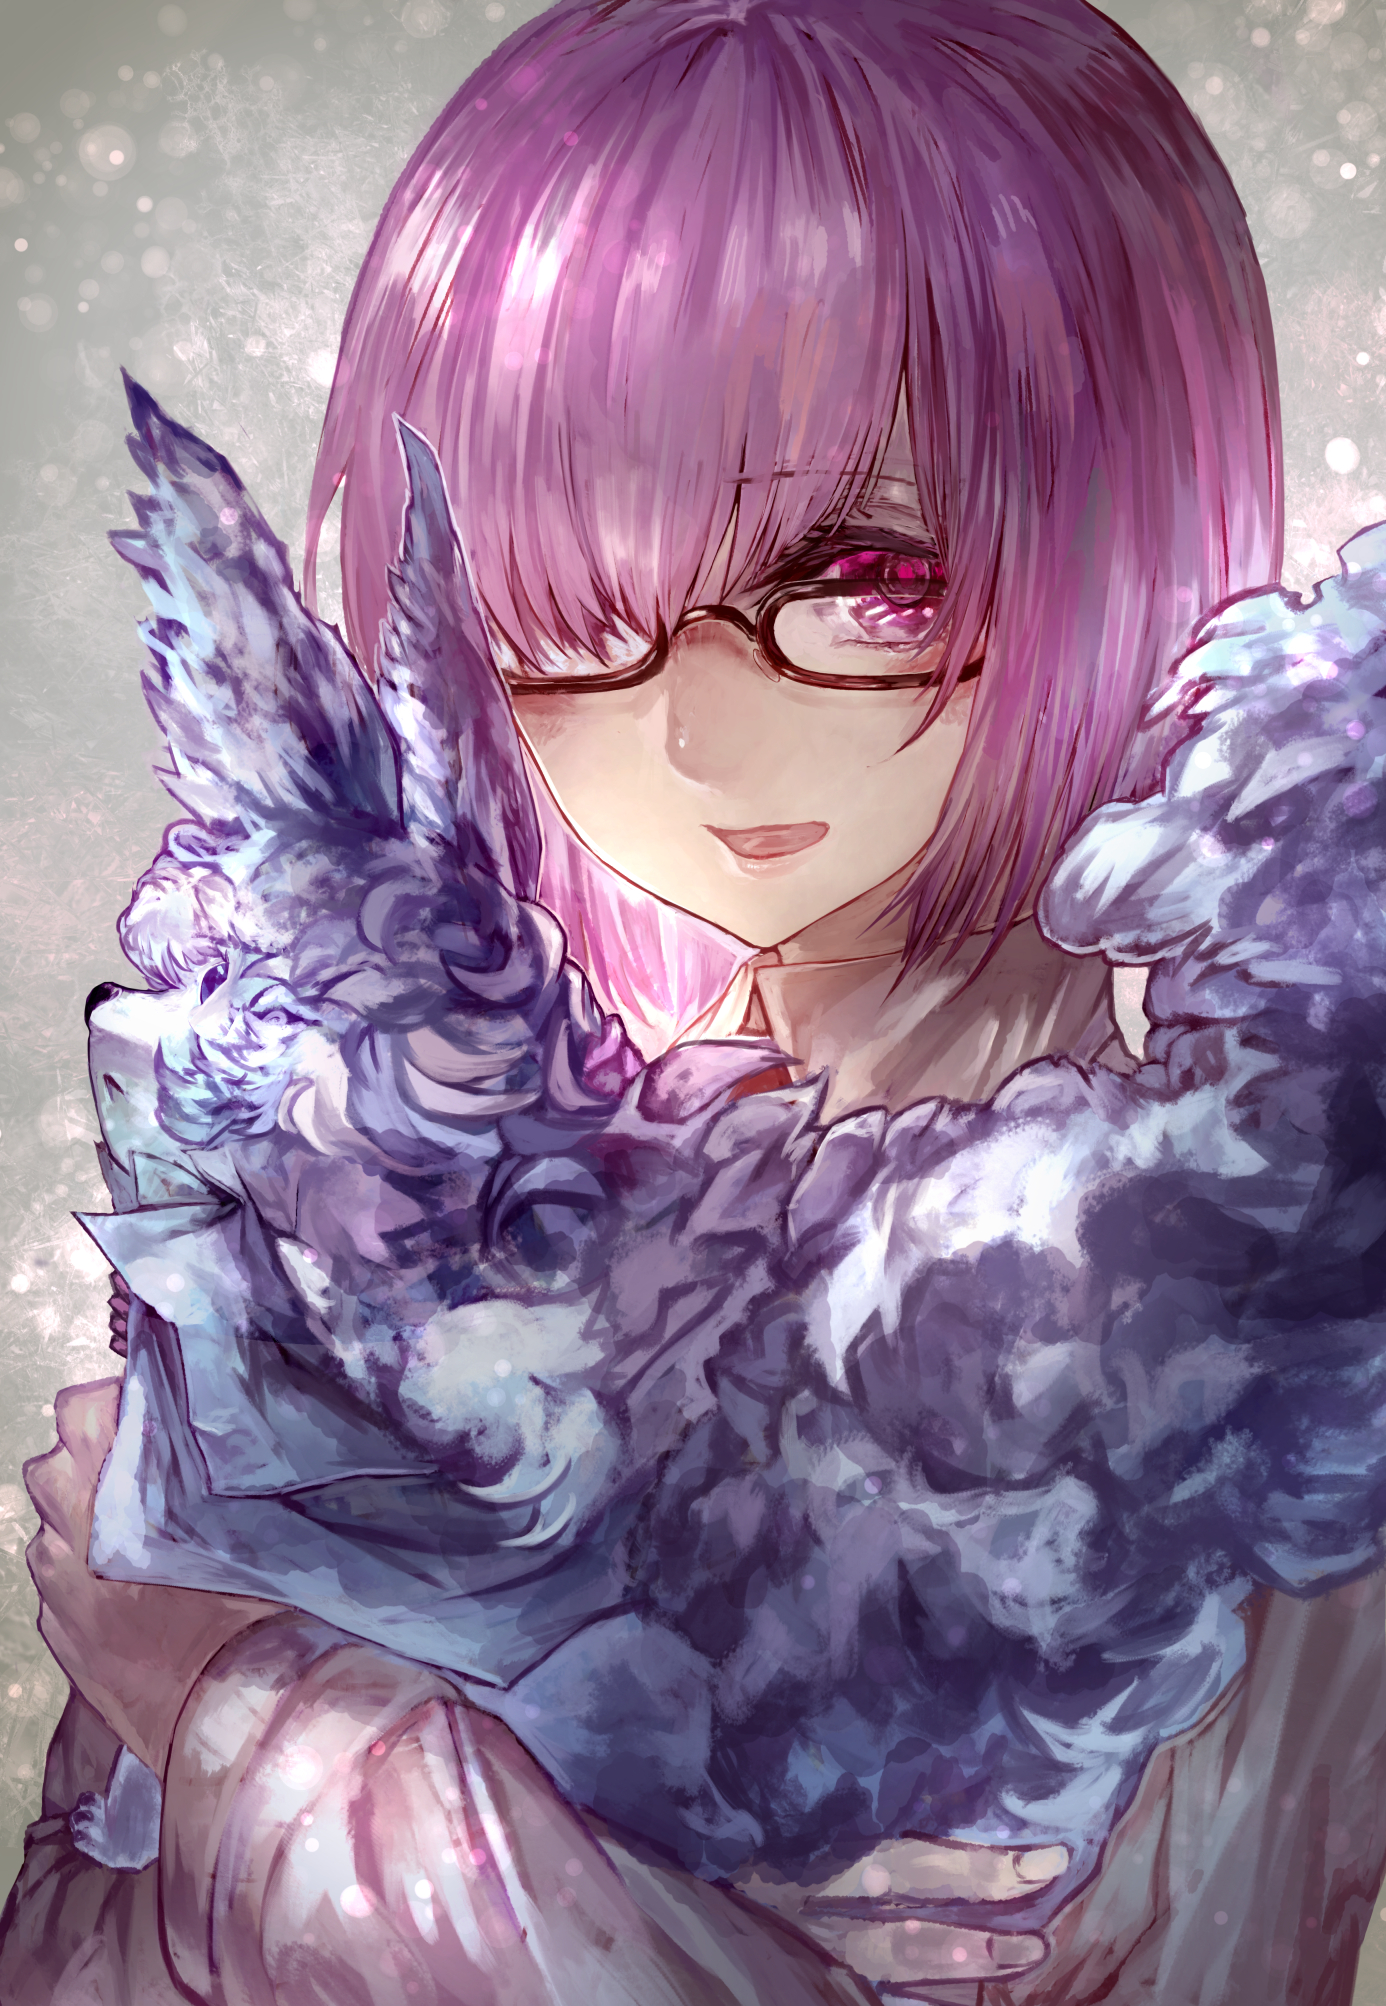 Anime 1386x2006 Fate series Fate/Grand Order signo aaa anime girls purple hair purple eyes Fou (Fate/Grand Order) Mash Kyrielight short hair looking at viewer women with glasses fan art 2D anime portrait display artwork